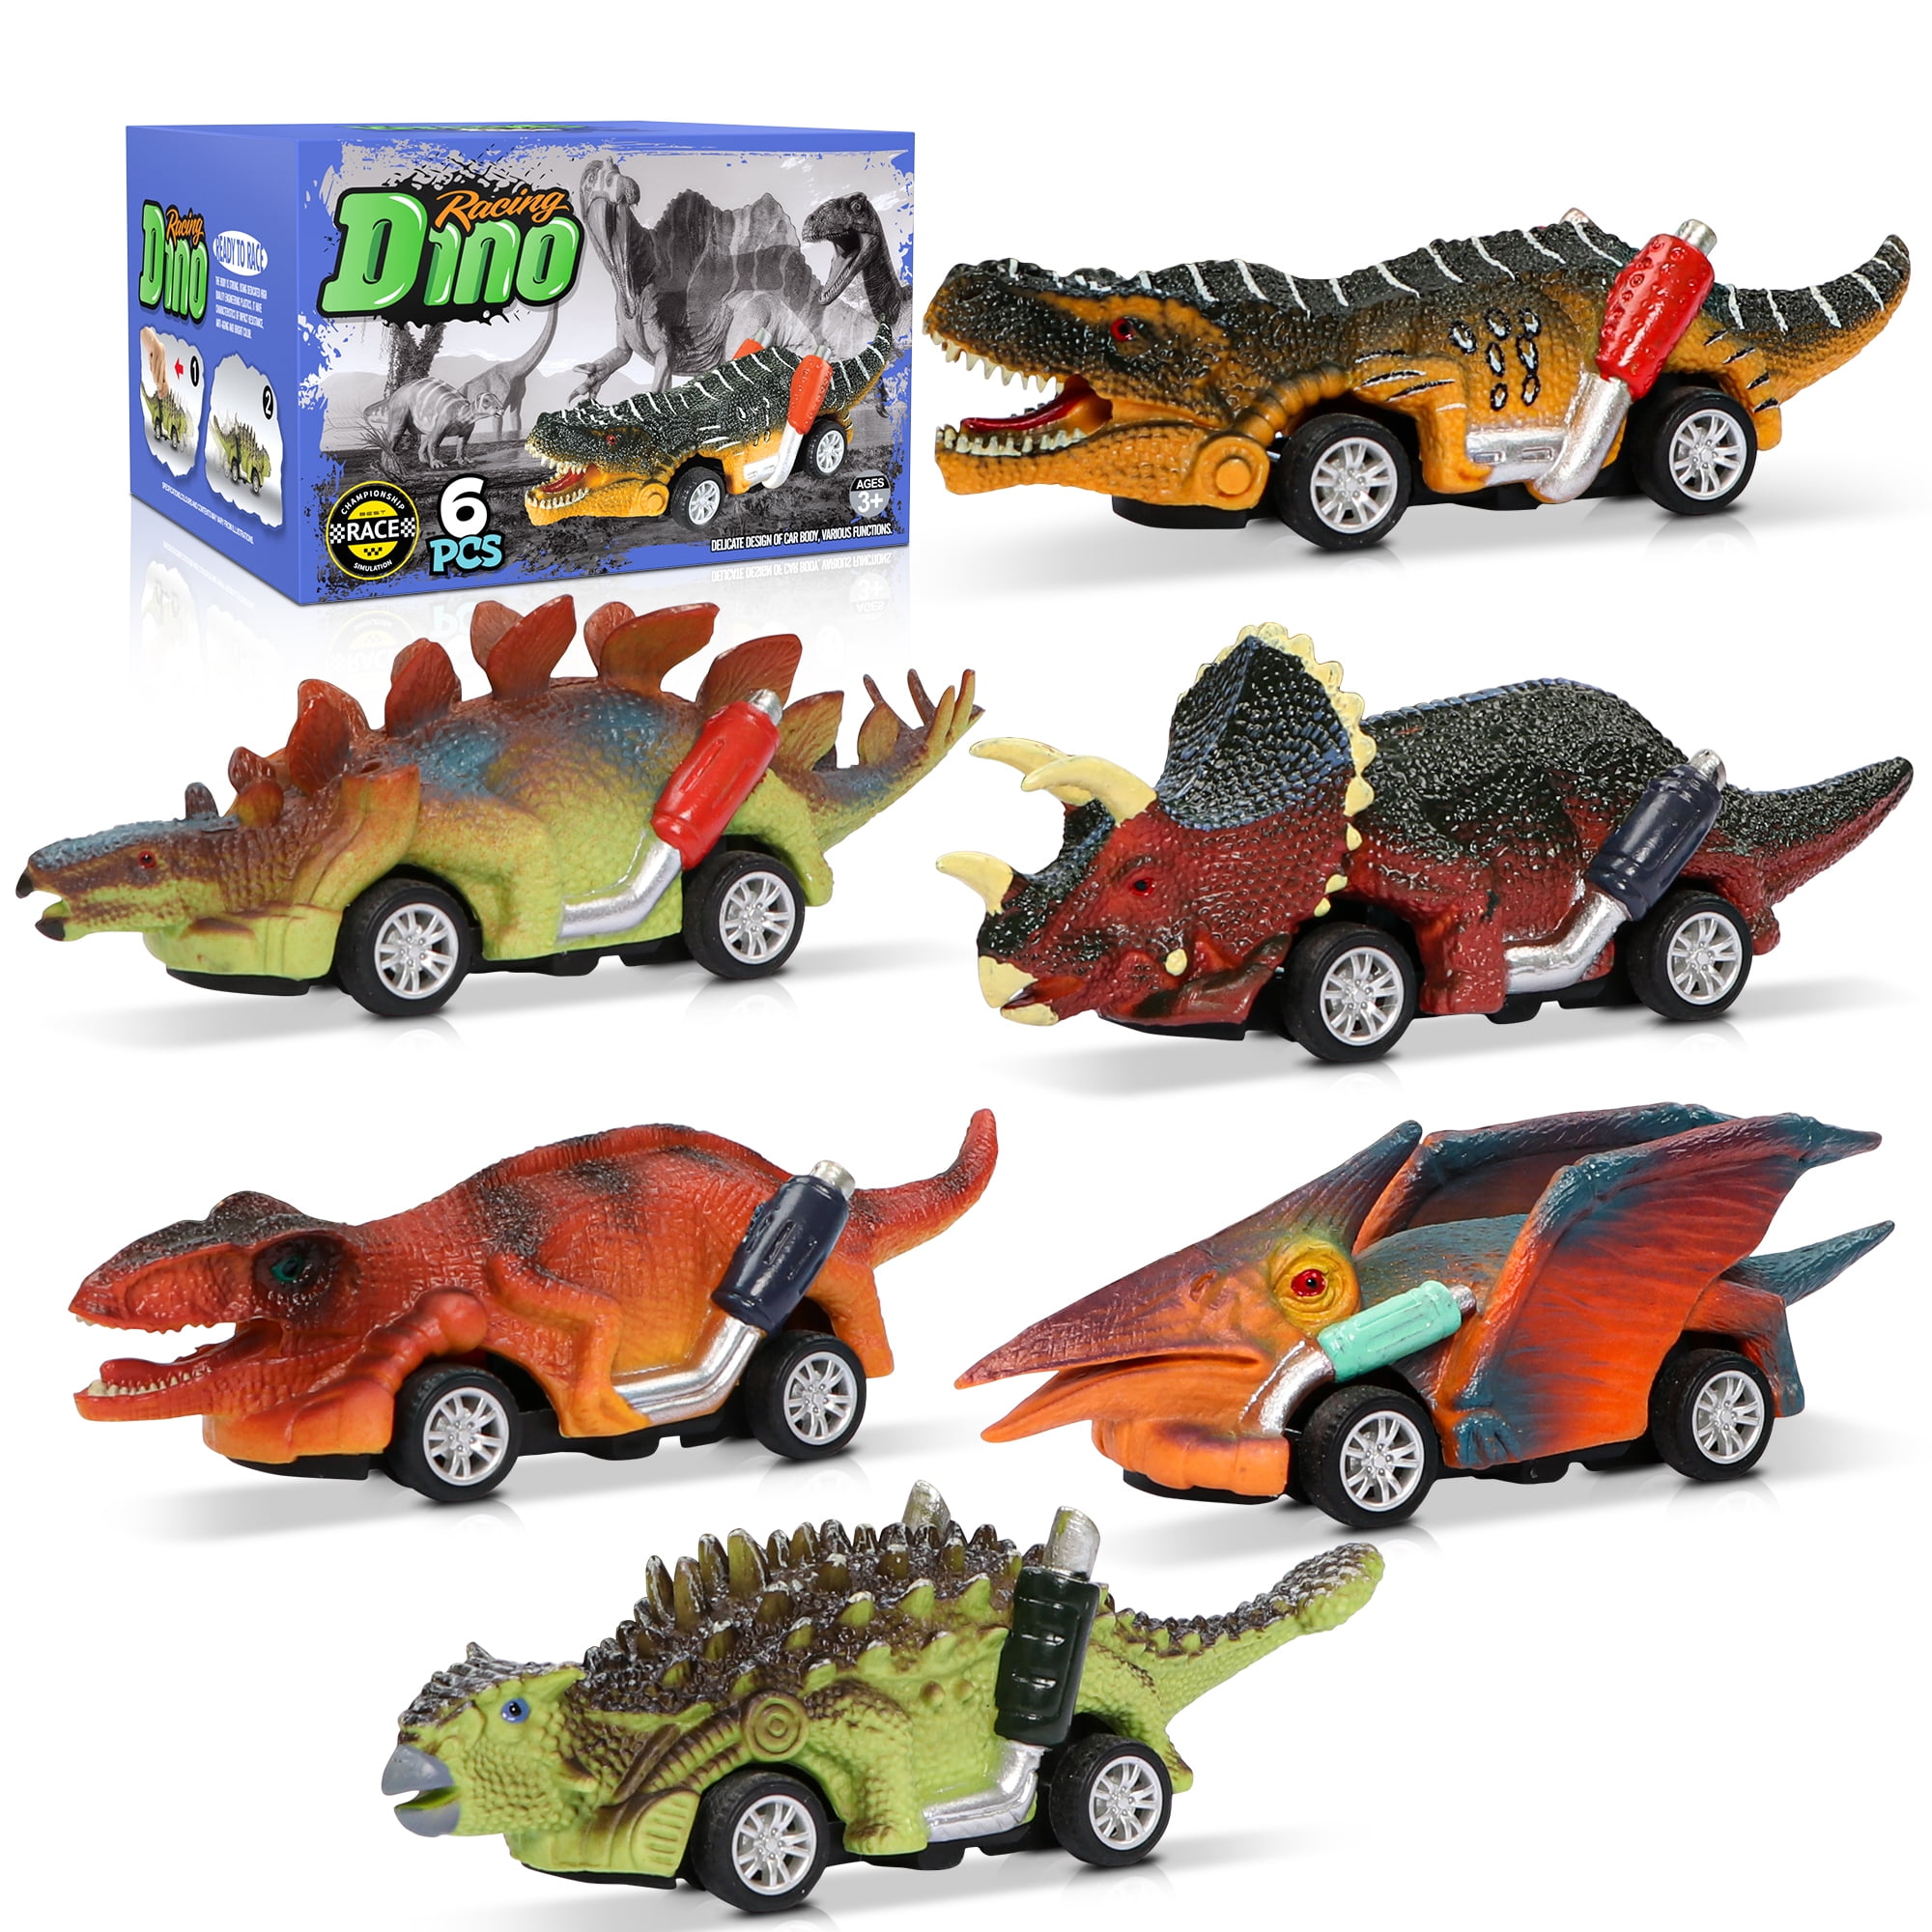 Kids Dinosaur Toys Toddler Boy Toys Vehicle Playsets with Flashing Lights for 5-7 Boys Girls Dinosaur Toys for Kids 3-5 Dino Toy Cars Boy Toys Age 2-5 2 Pack Christmas Birthday Gifts for Kids 